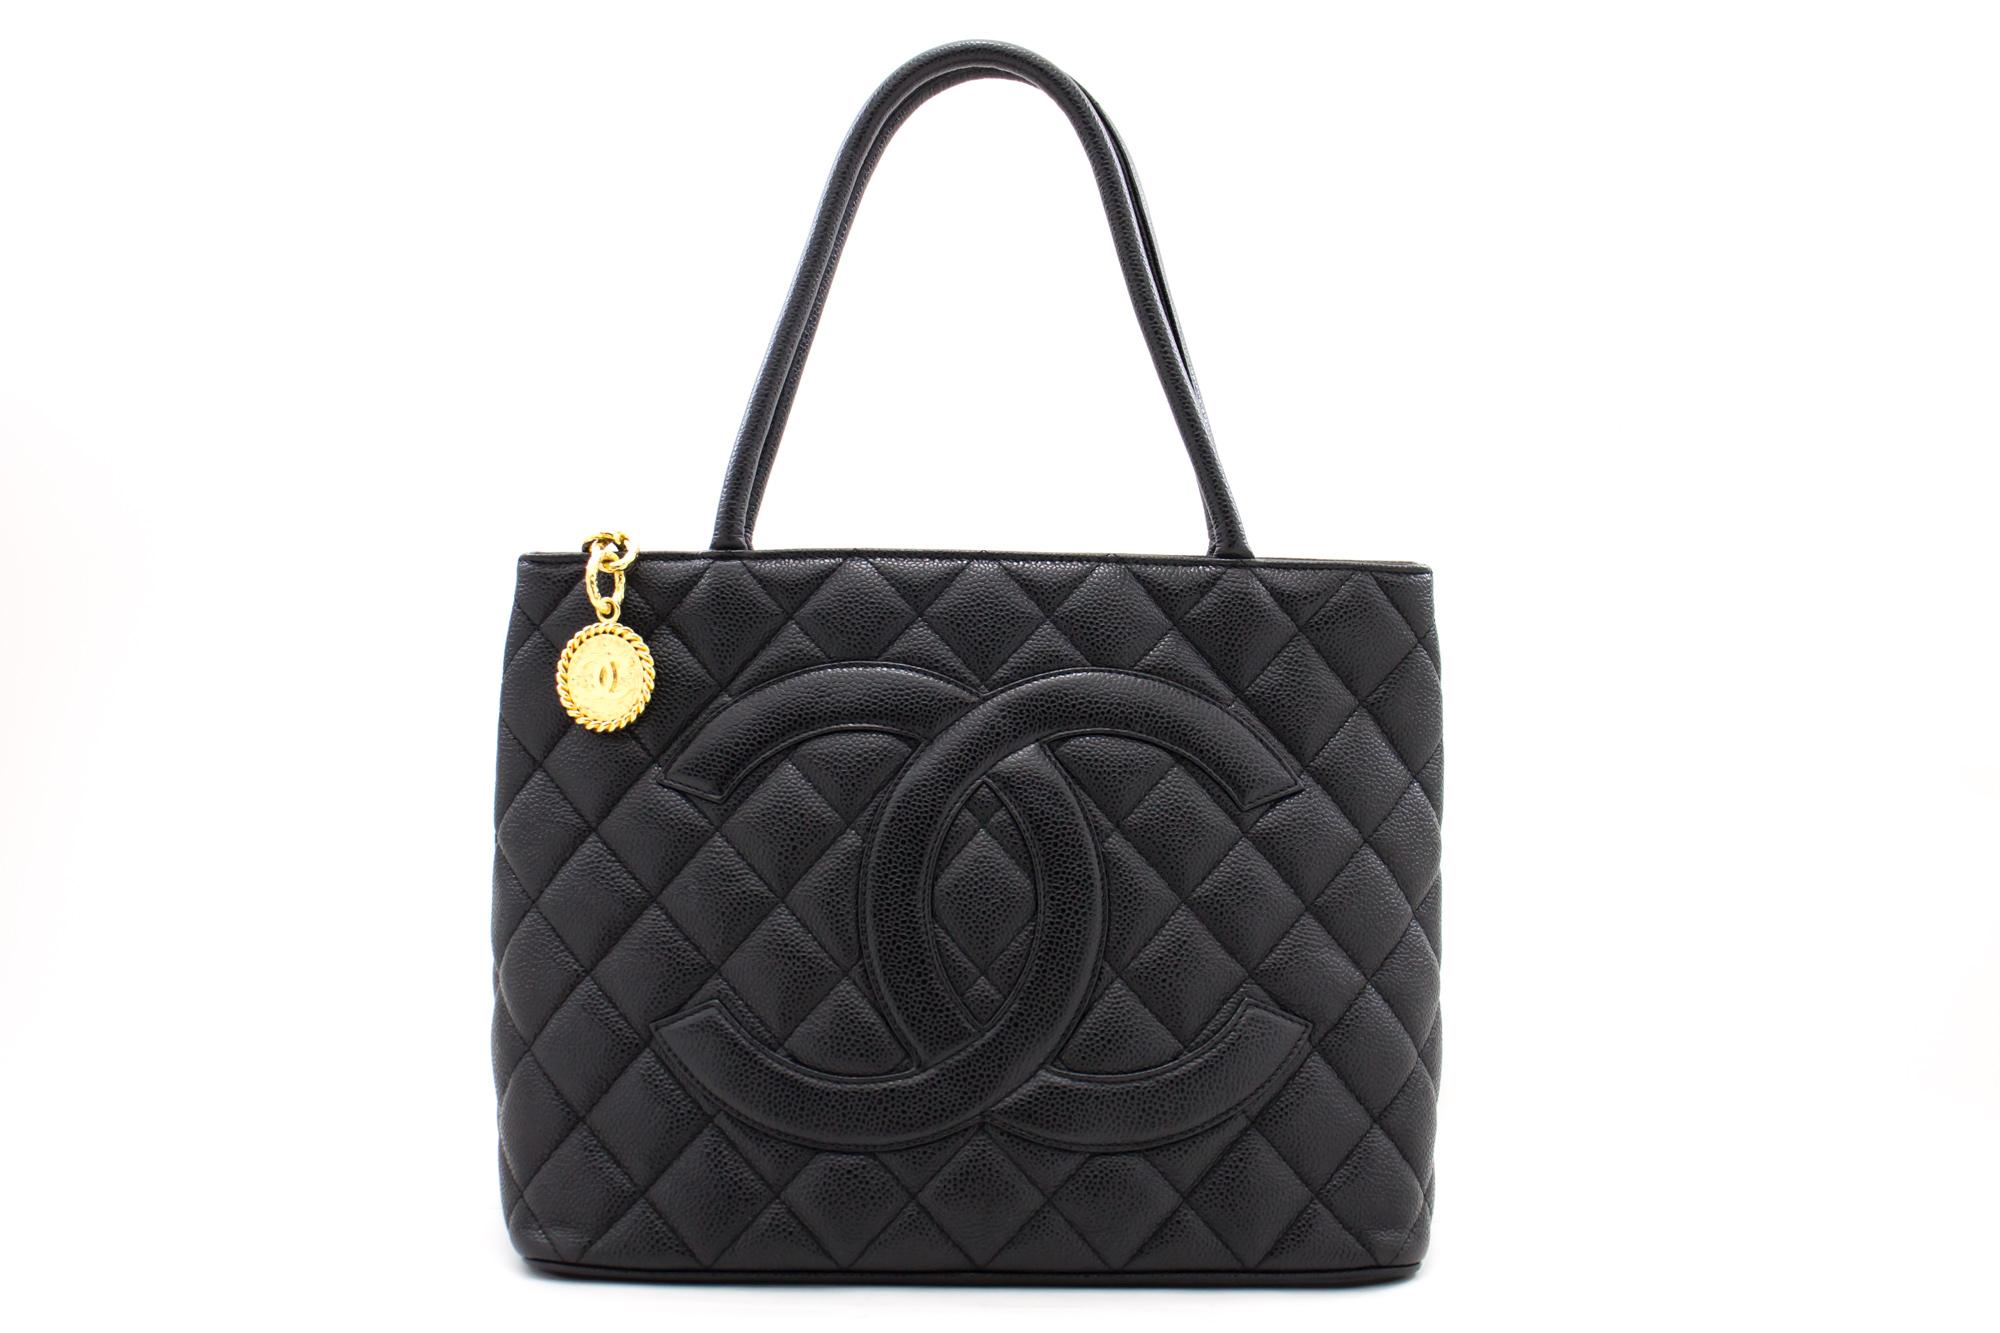 An authentic CHANEL Gold Medallion Caviar Shoulder Bag Grand Shopping Tote. The color is Gold. The outside material is Leather. The pattern is Solid. This item is Contemporary. The year of manufacture would be 2000-2 0 0 2 .
Conditions &